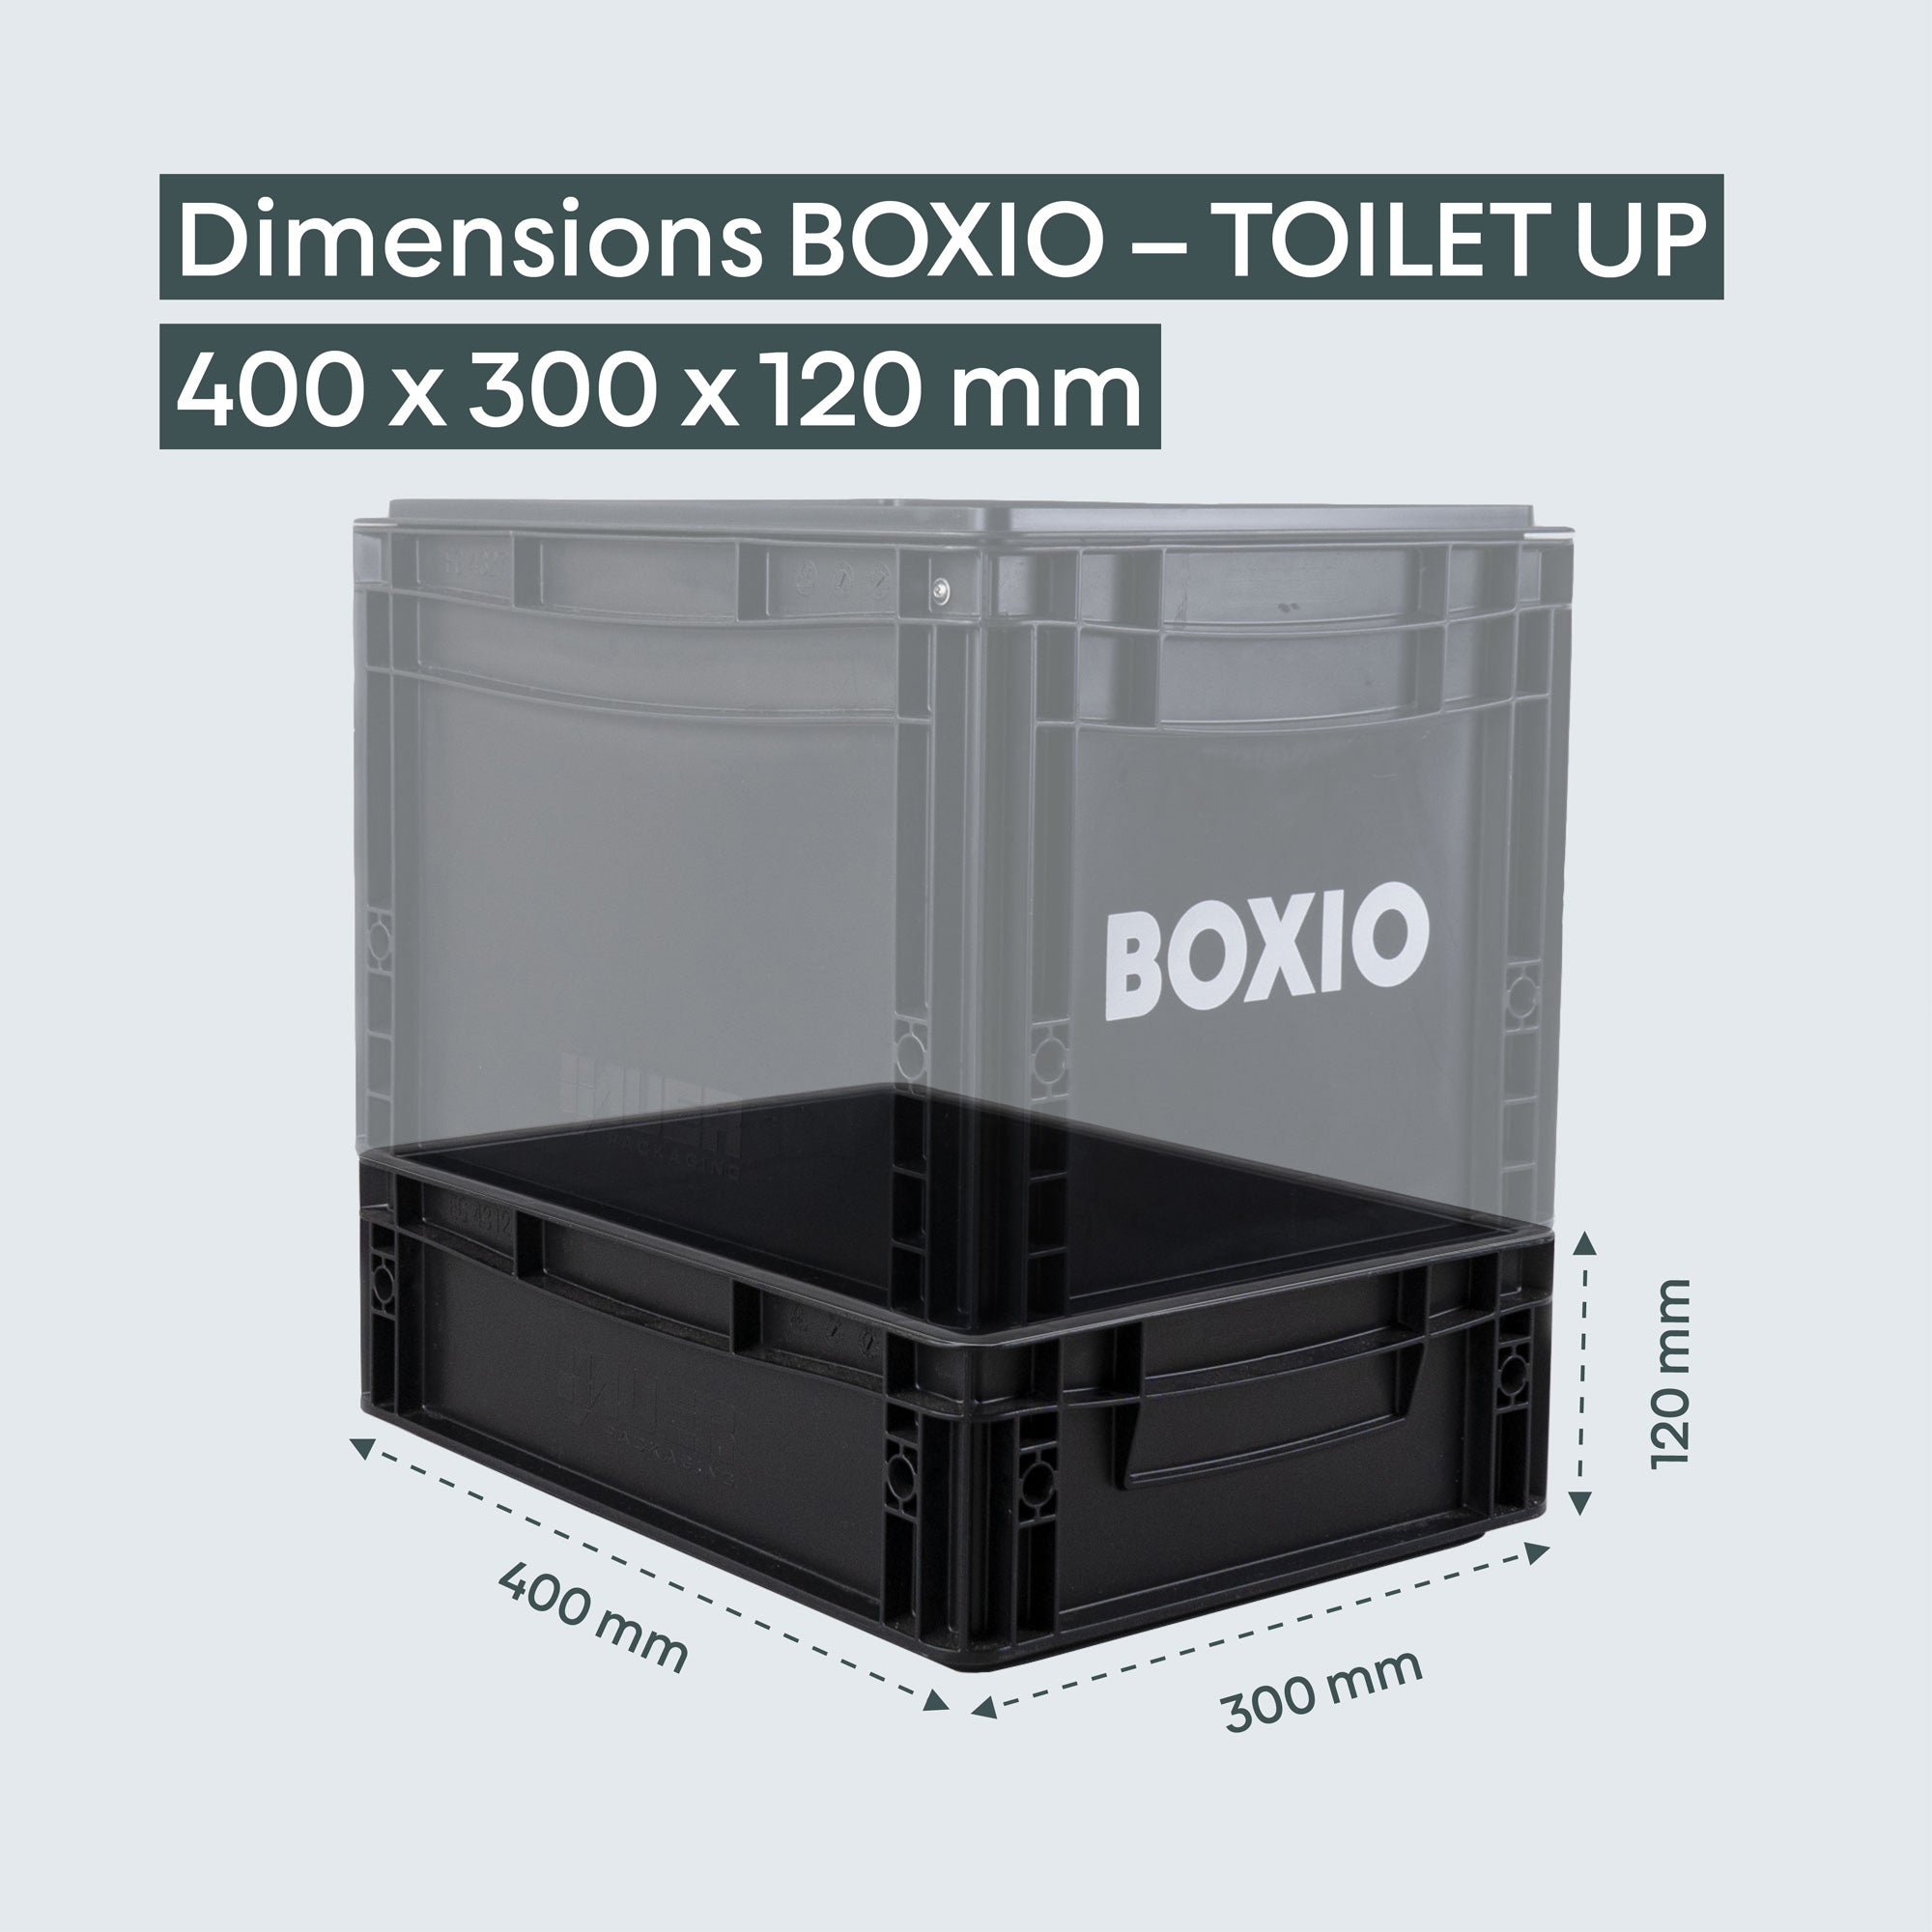 Buy BOXIO TOILET MAX+ The inexpensive separation toilet as a complete set